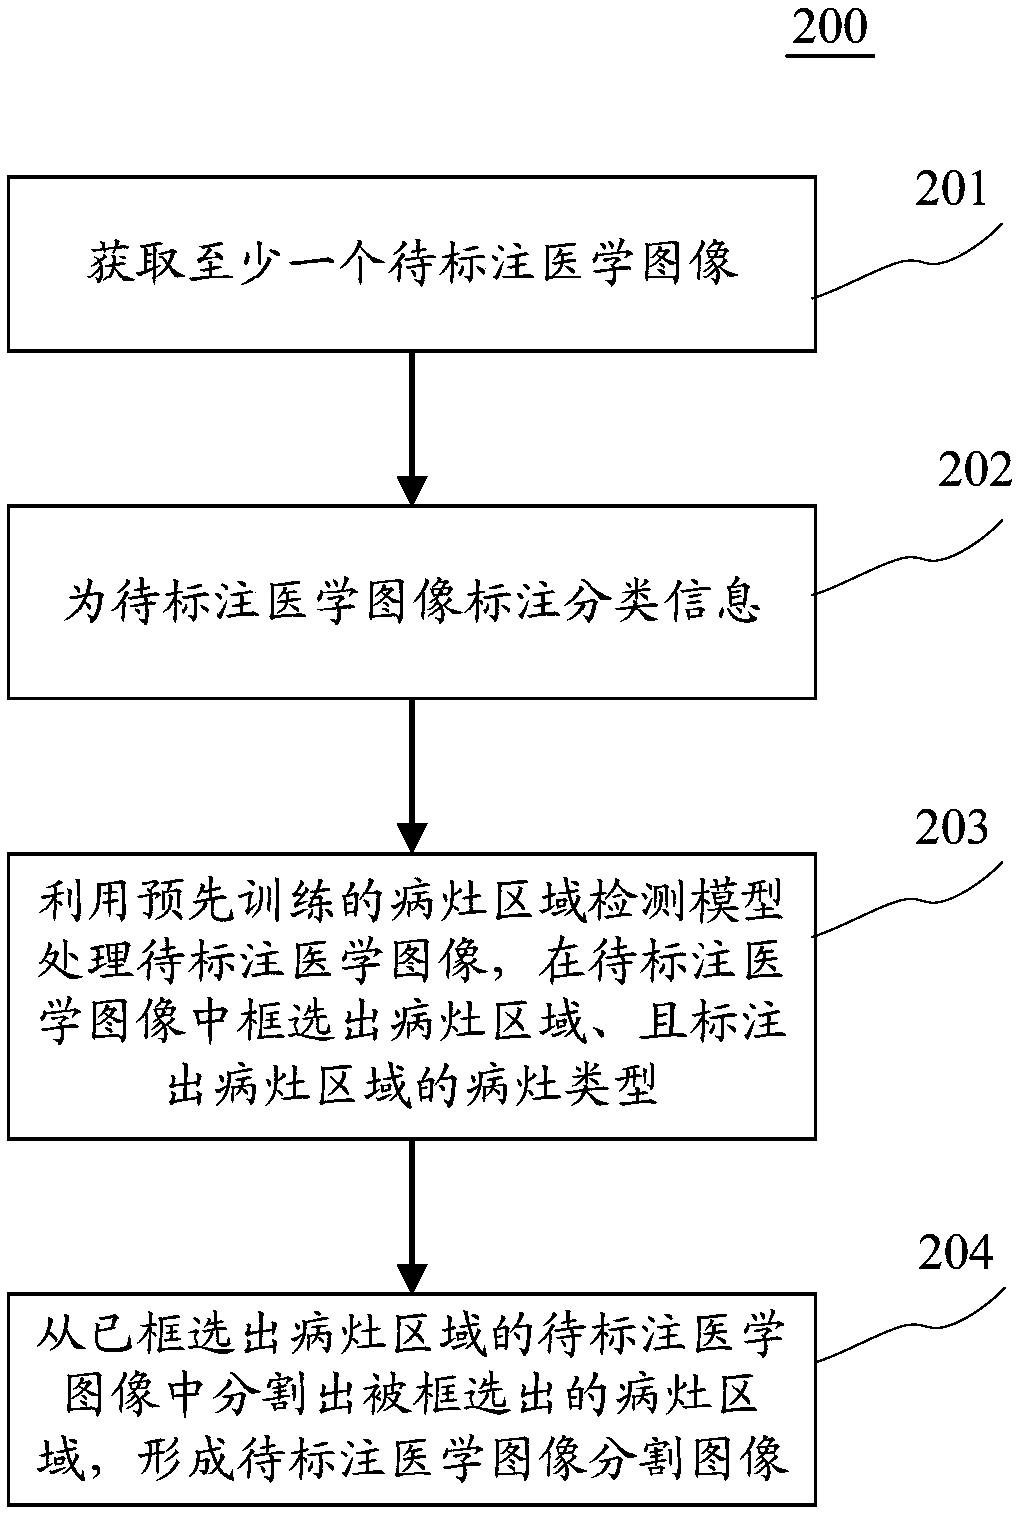 Method and device for annotating medical images